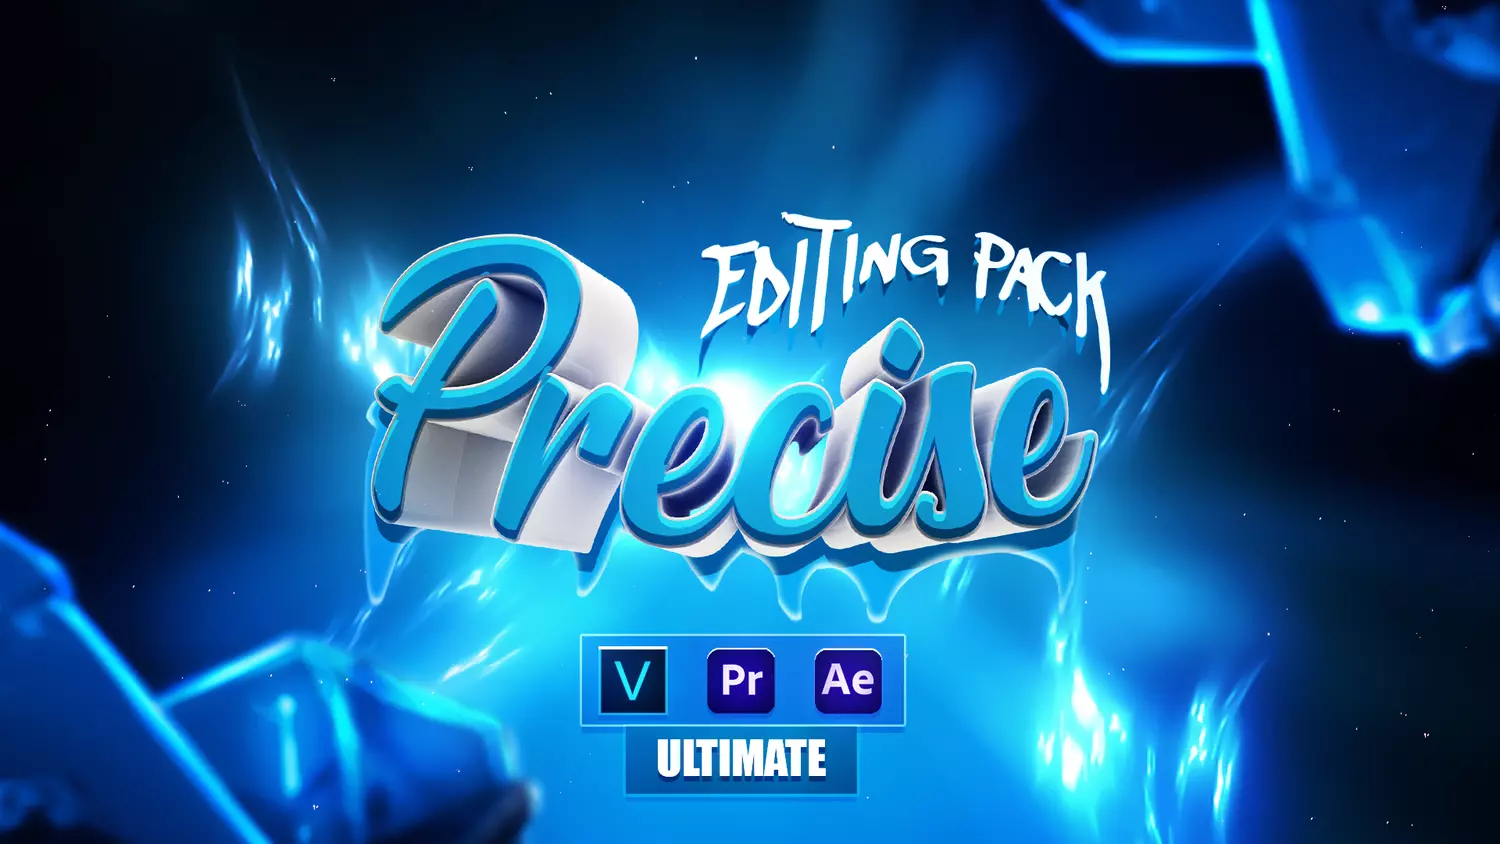 Precise Editing Pack (ULTIMATE EDITION) link image